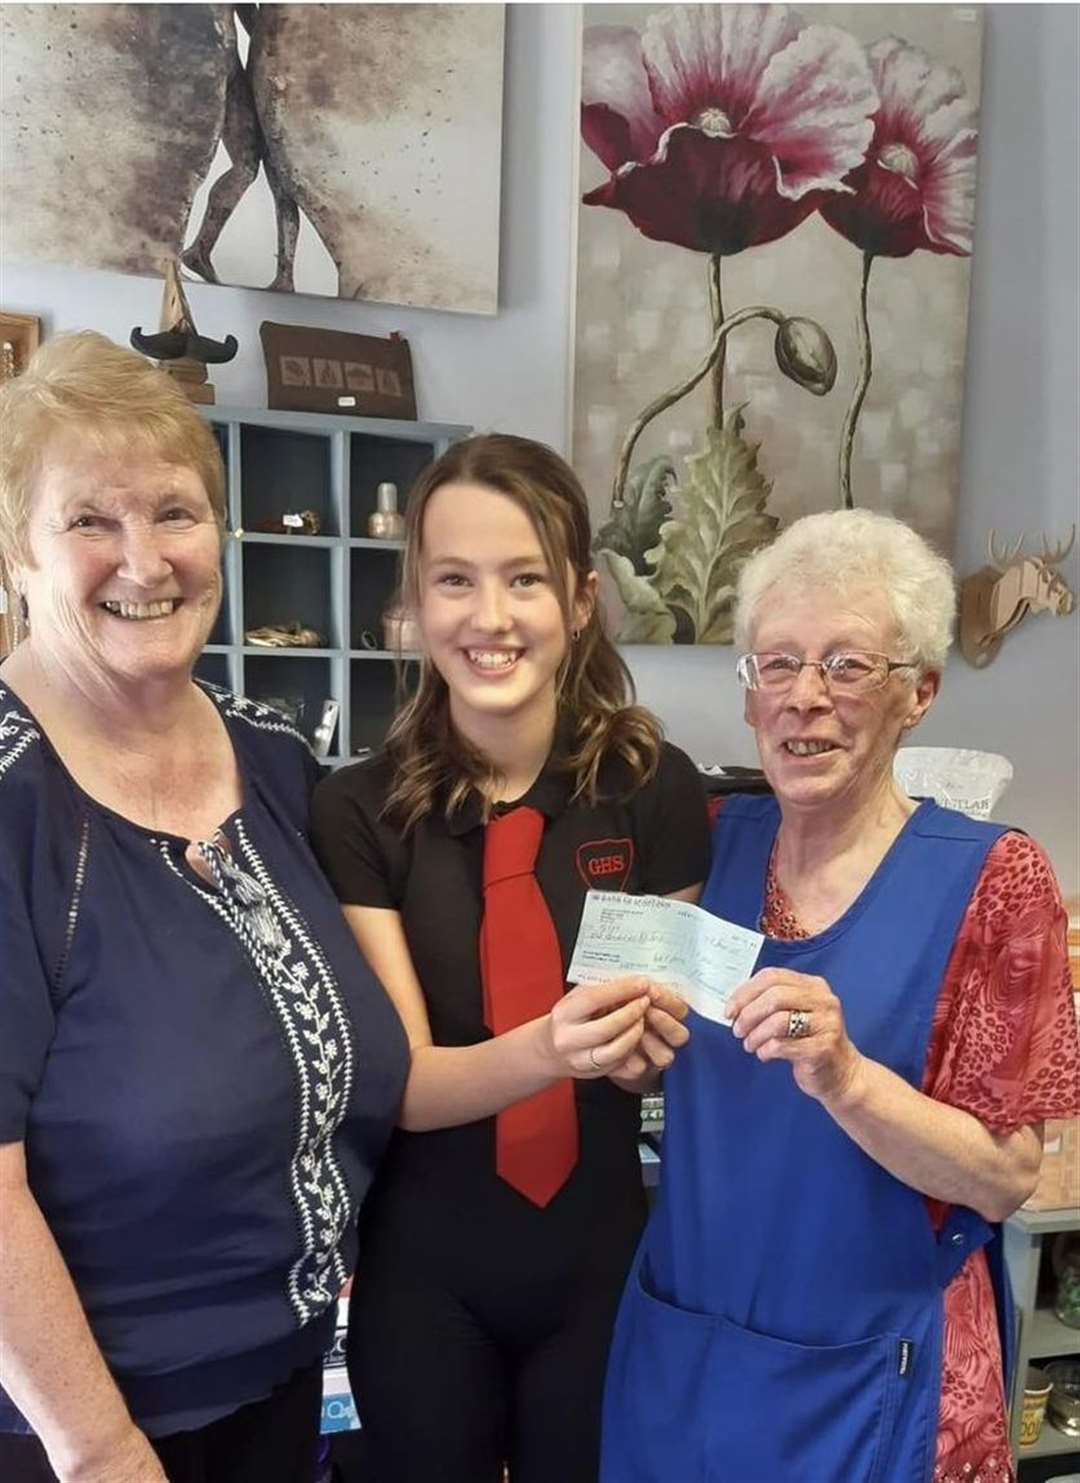 Poppy Mackay presents the £150 cheque she received for her nominated charity as part of her award to TYKES shop volunteers Moura Campbell and Marie Macleod.